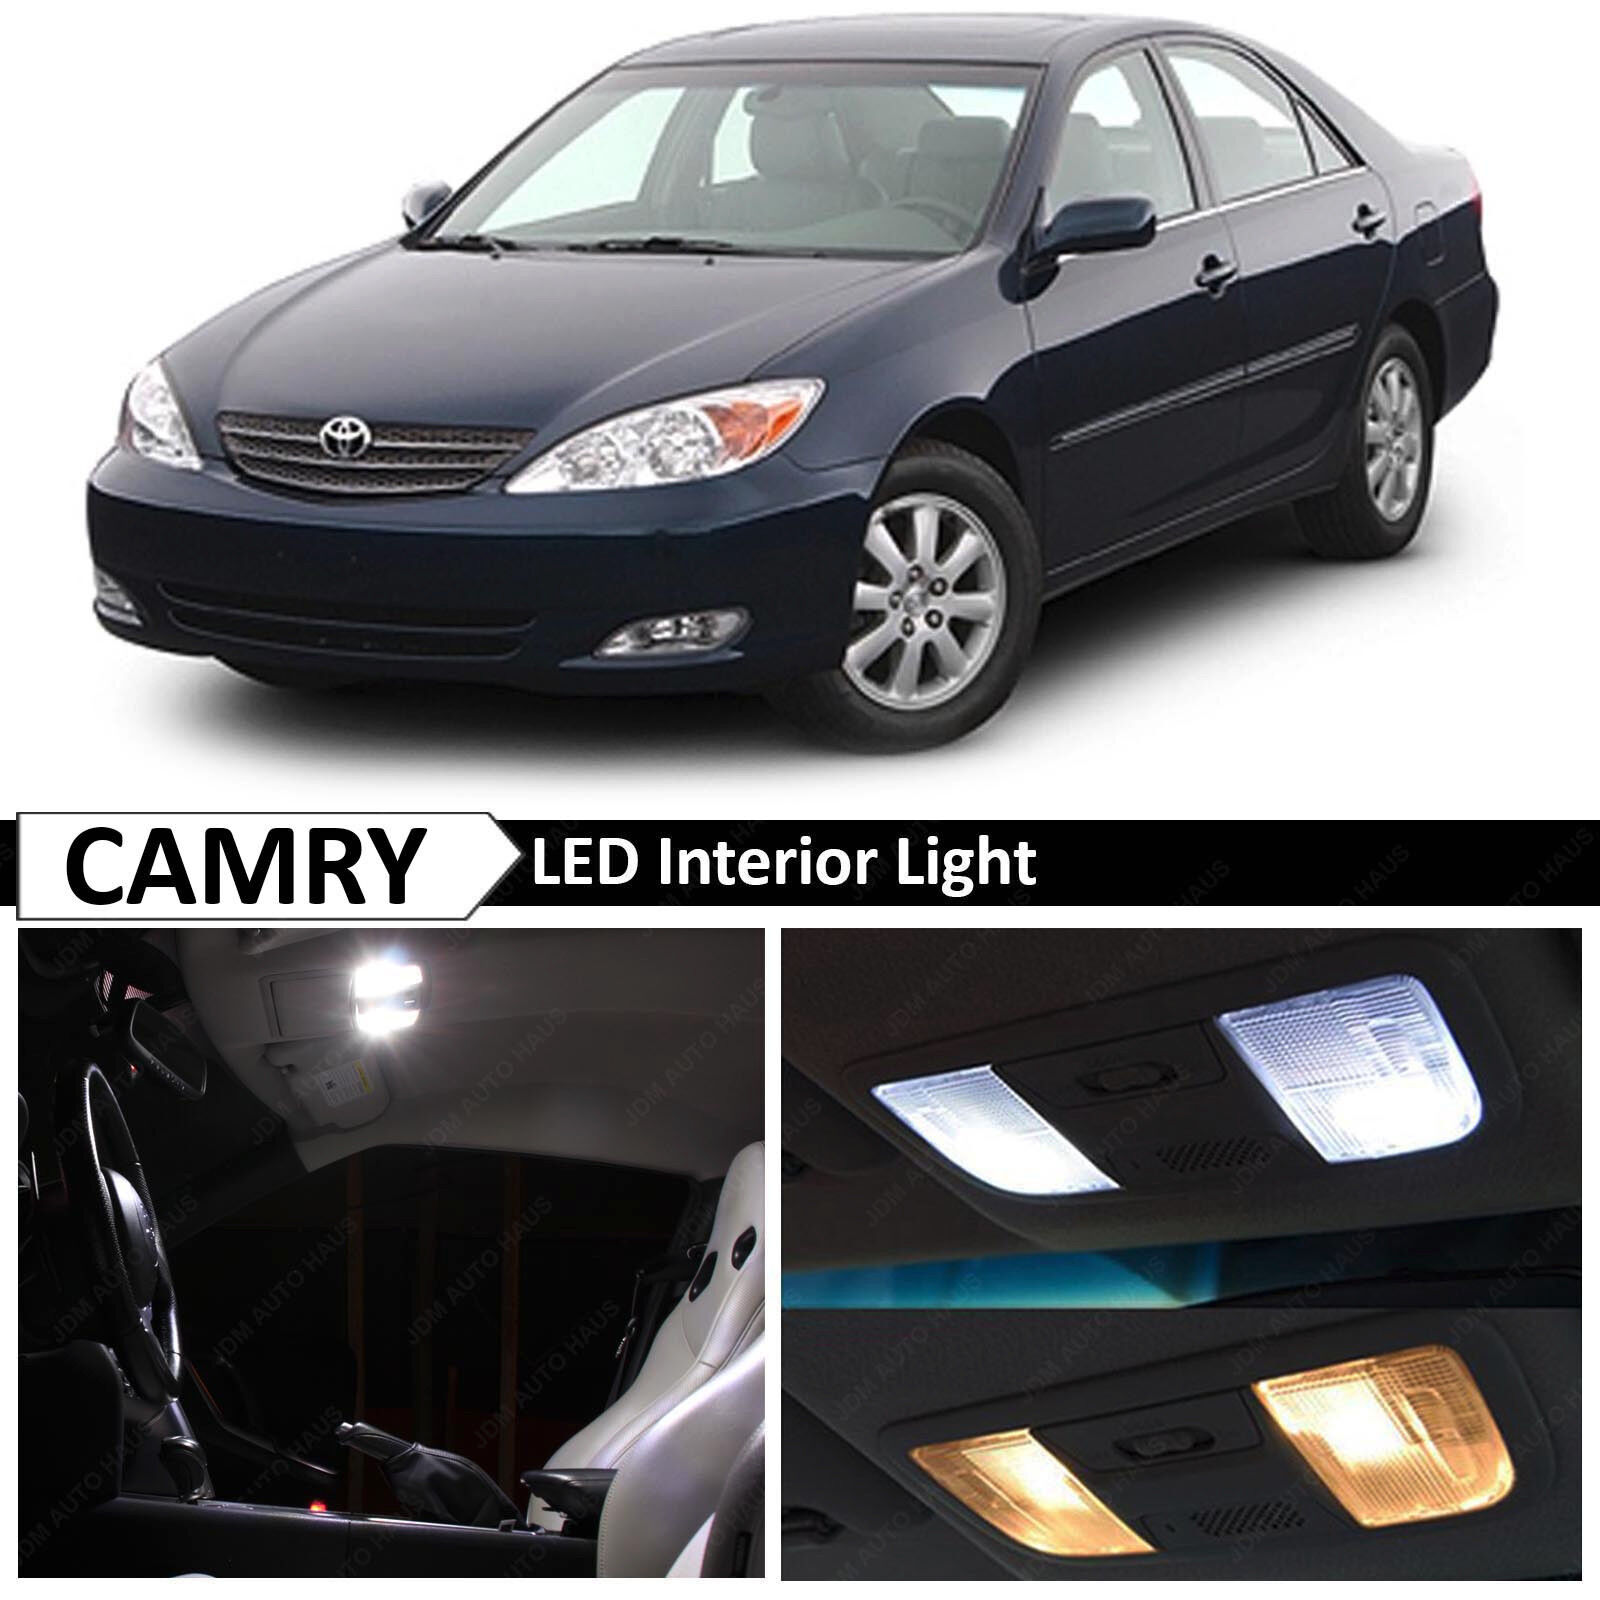 10x White Interior LED Lights Package Kit for 2002-2006 Toyota Camry + TOOL